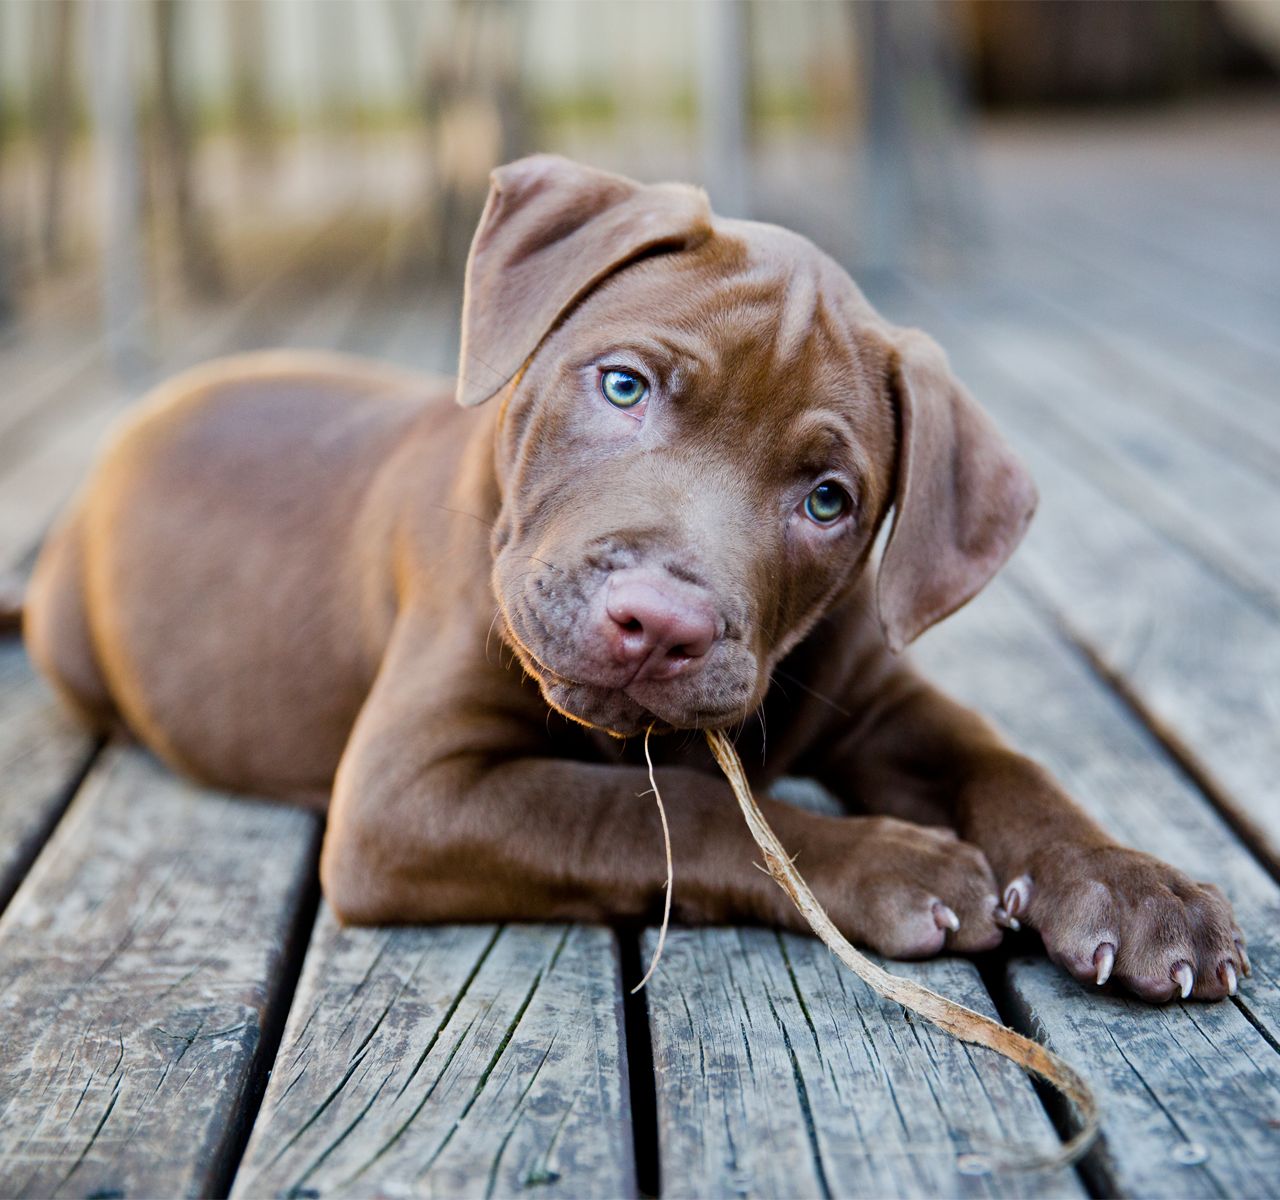 Puppy Tips for Raising Your Furry Friend